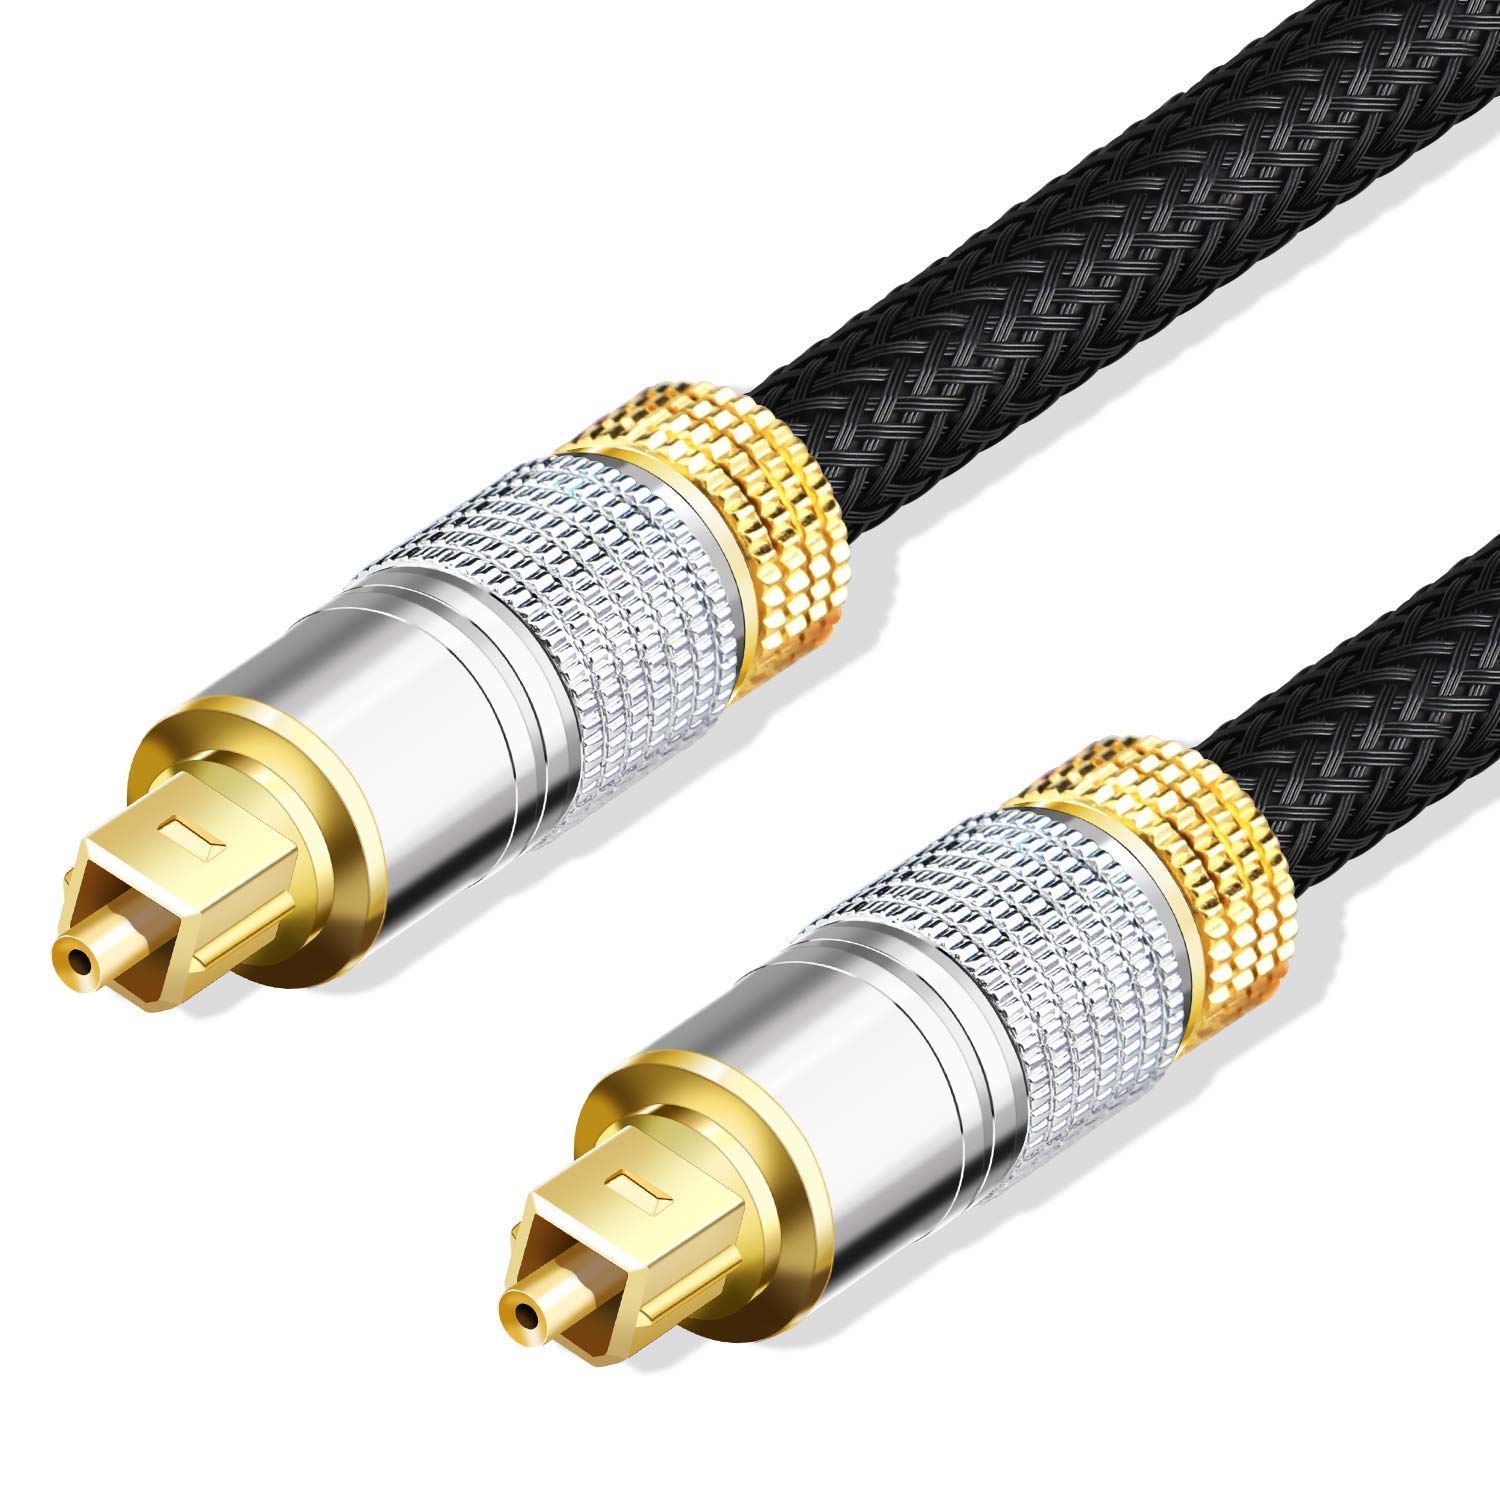 ISTAR 3M-10FT Digital Fiber Optical Toslink Cable Gold Plated Audio Lead for Home Theater, Sound Bar, TV, PS4,Xbox, Playstation (Nylon Braided)